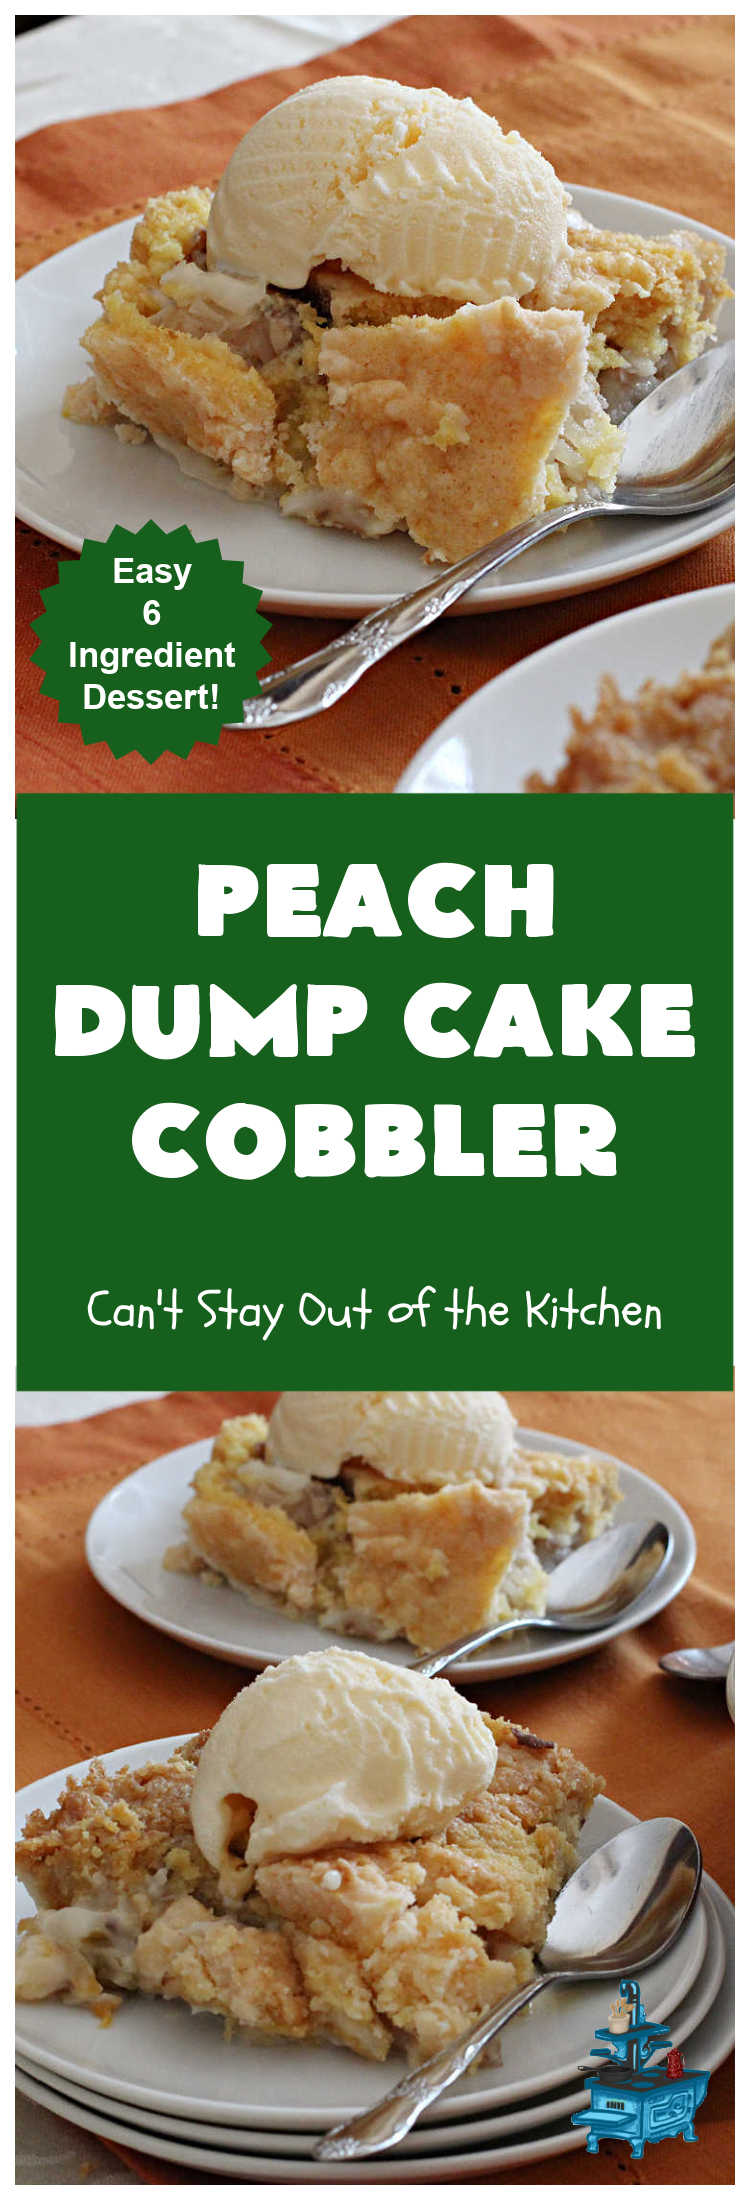 Peach Dump Cake Cobbler | Can't Stay Out of the Kitchen | this easy 6-ingredient #dessert is quick to toss together. You can use #PeachPieFilling #CannedPeaches or #PeachesAndCremePieFilling which is phenomenal. If you need a quick #dessert this one is so delectable--especially topped with #IceCream. Don't Let the name fool you. #DumpCake is really more like #cobbler than cake. Everything is dumped into the dish & then baked. So quick & easy. #PeachDumpCakeCobbler